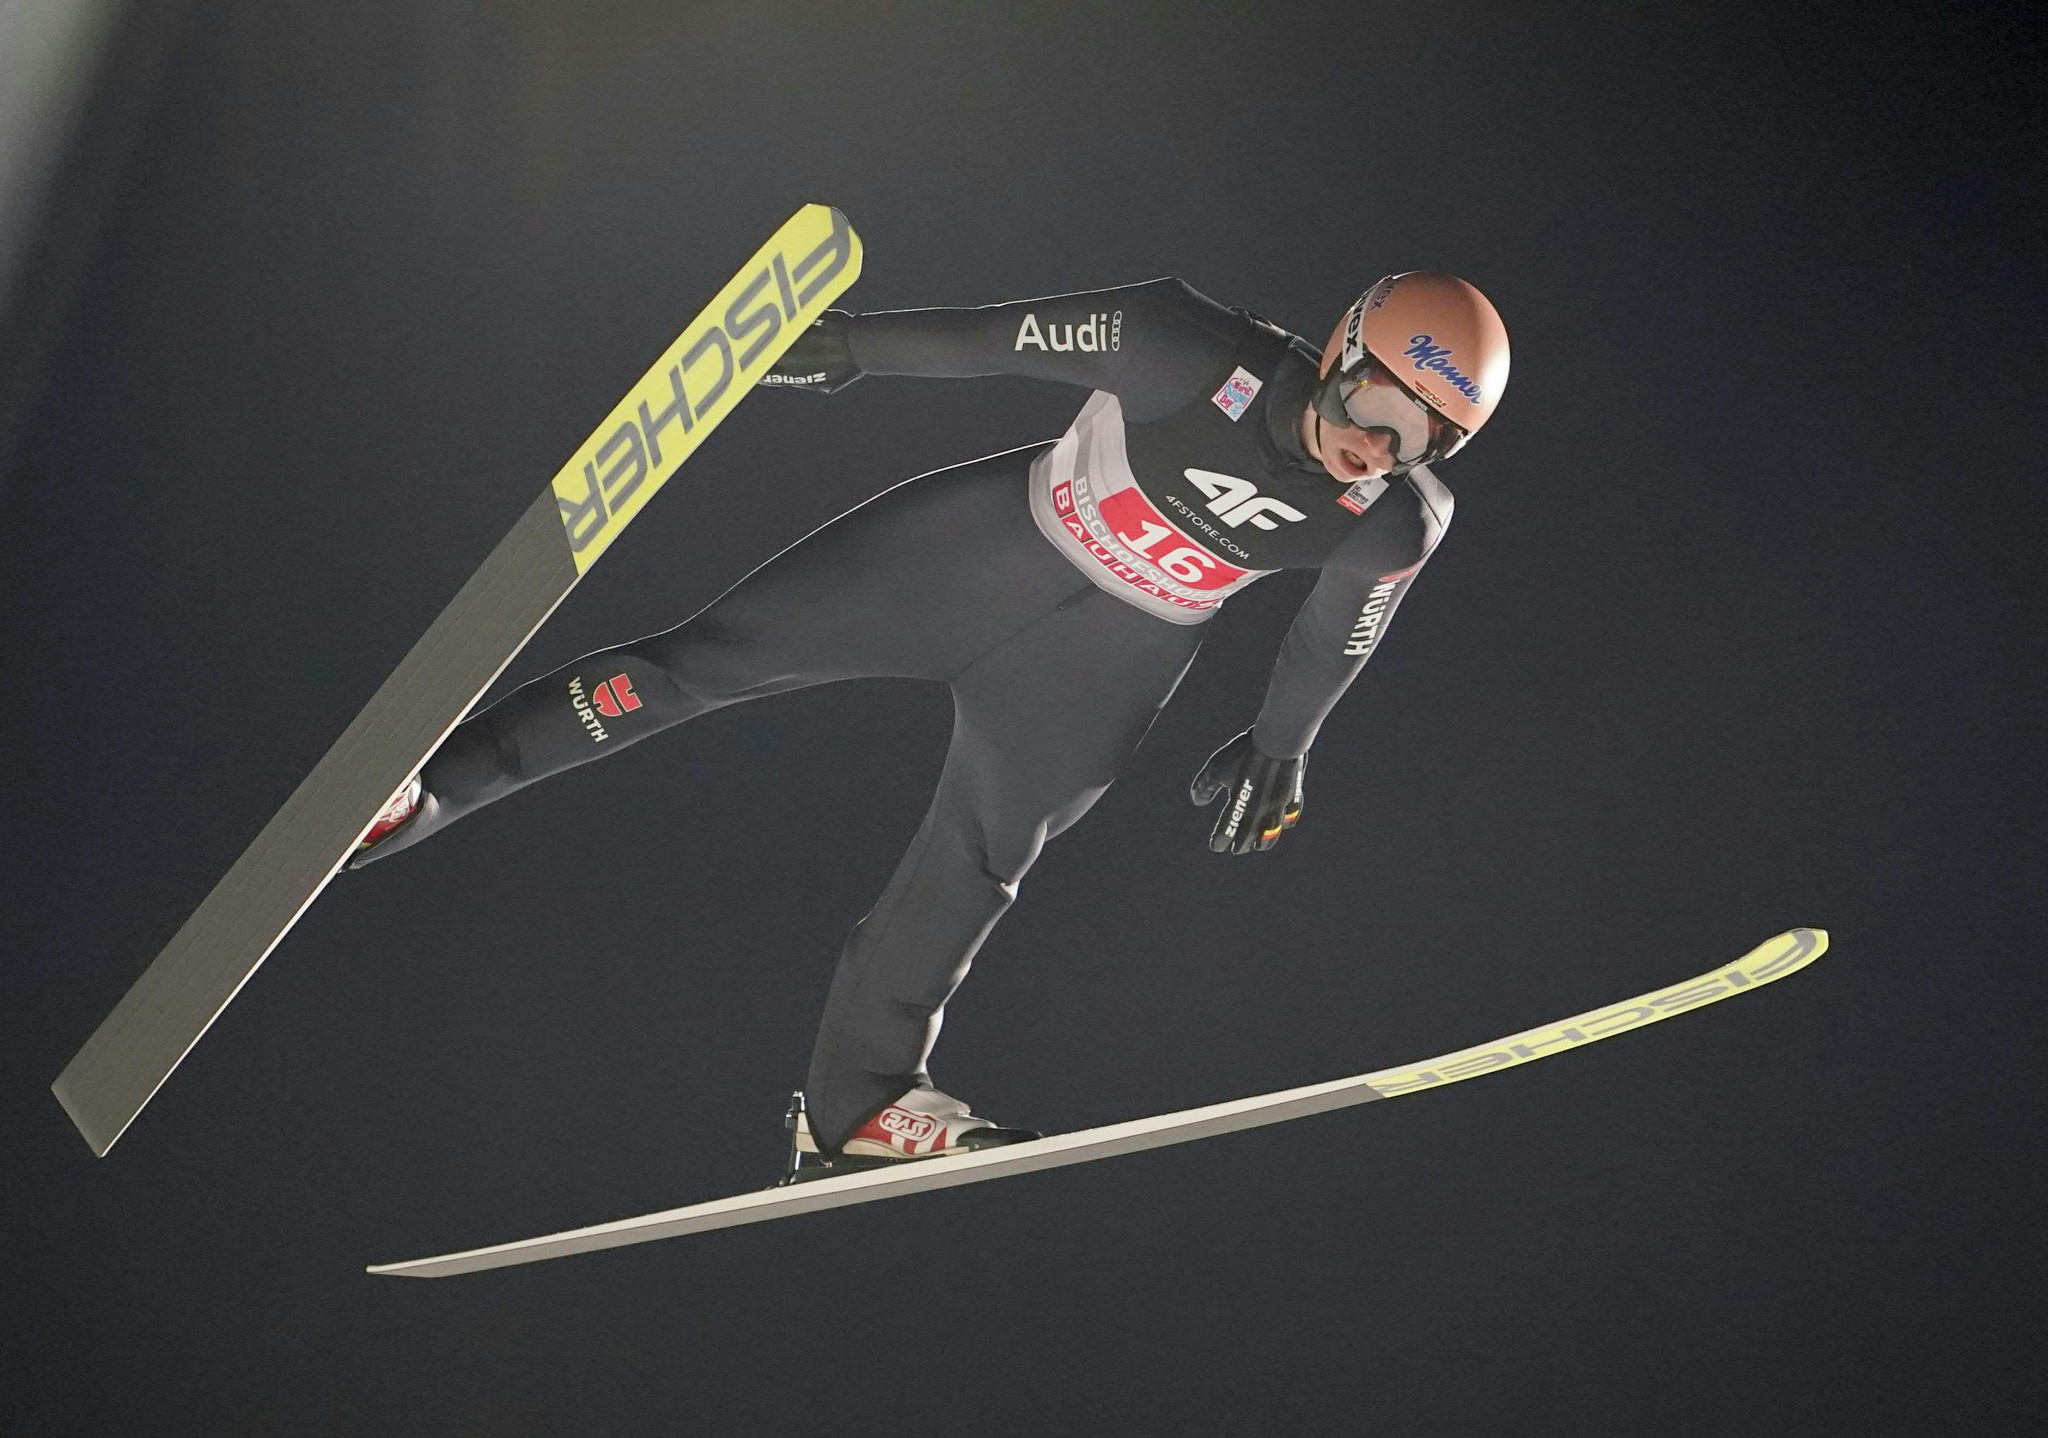 Geiger out to continue superb form at home FIS Ski Jumping World Cup in Titisee-Neustadt